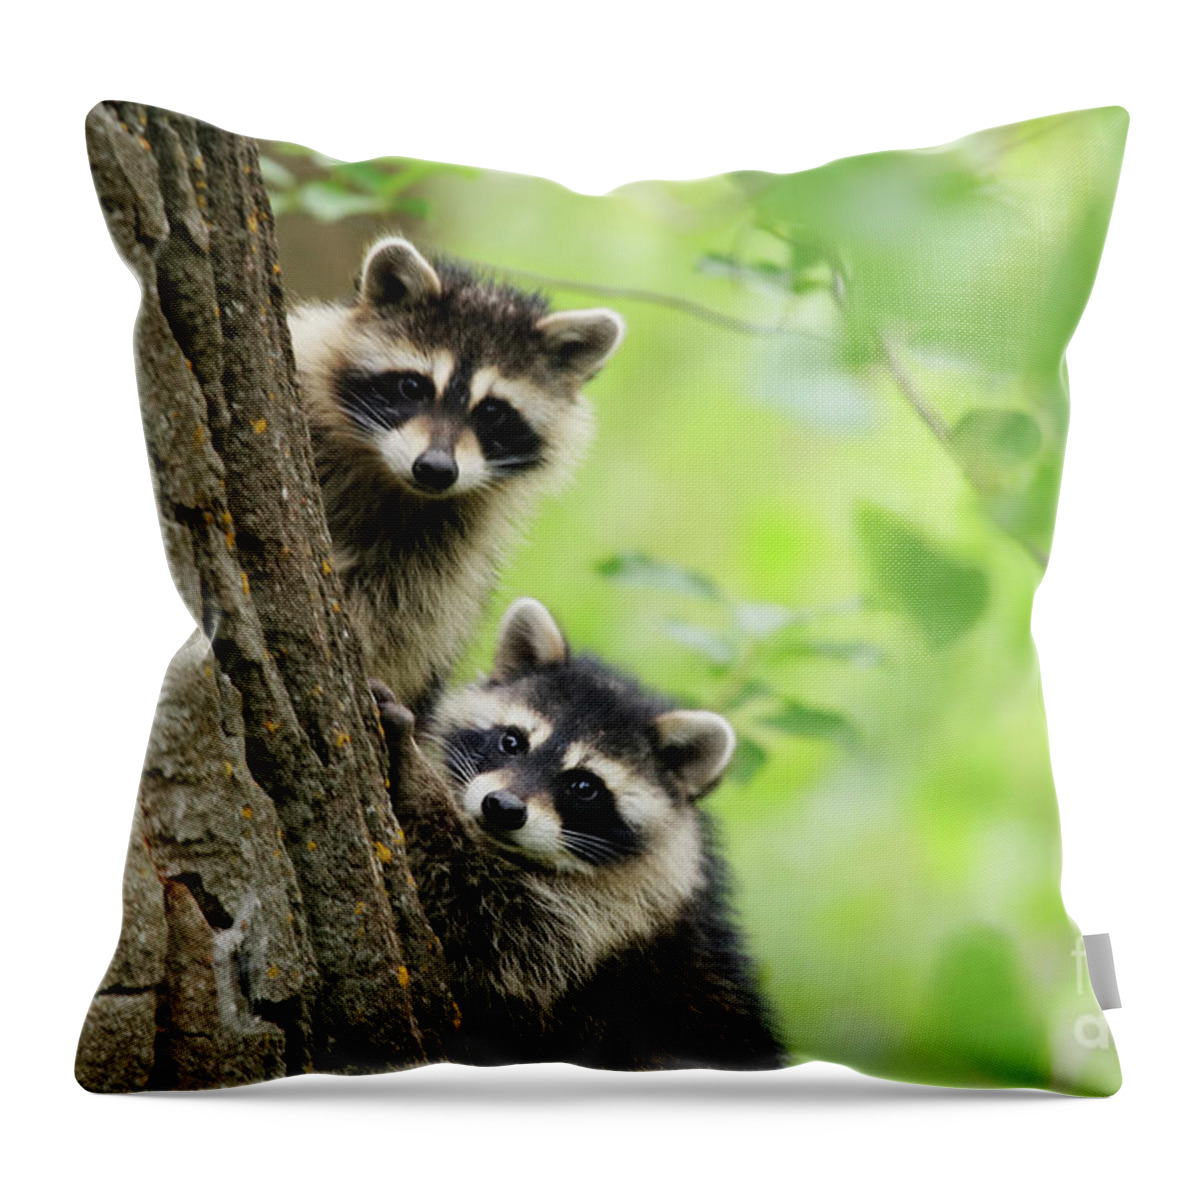 Tiny Bandits Throw Pillow featuring the photograph Tiny Bandits by Alyce Taylor